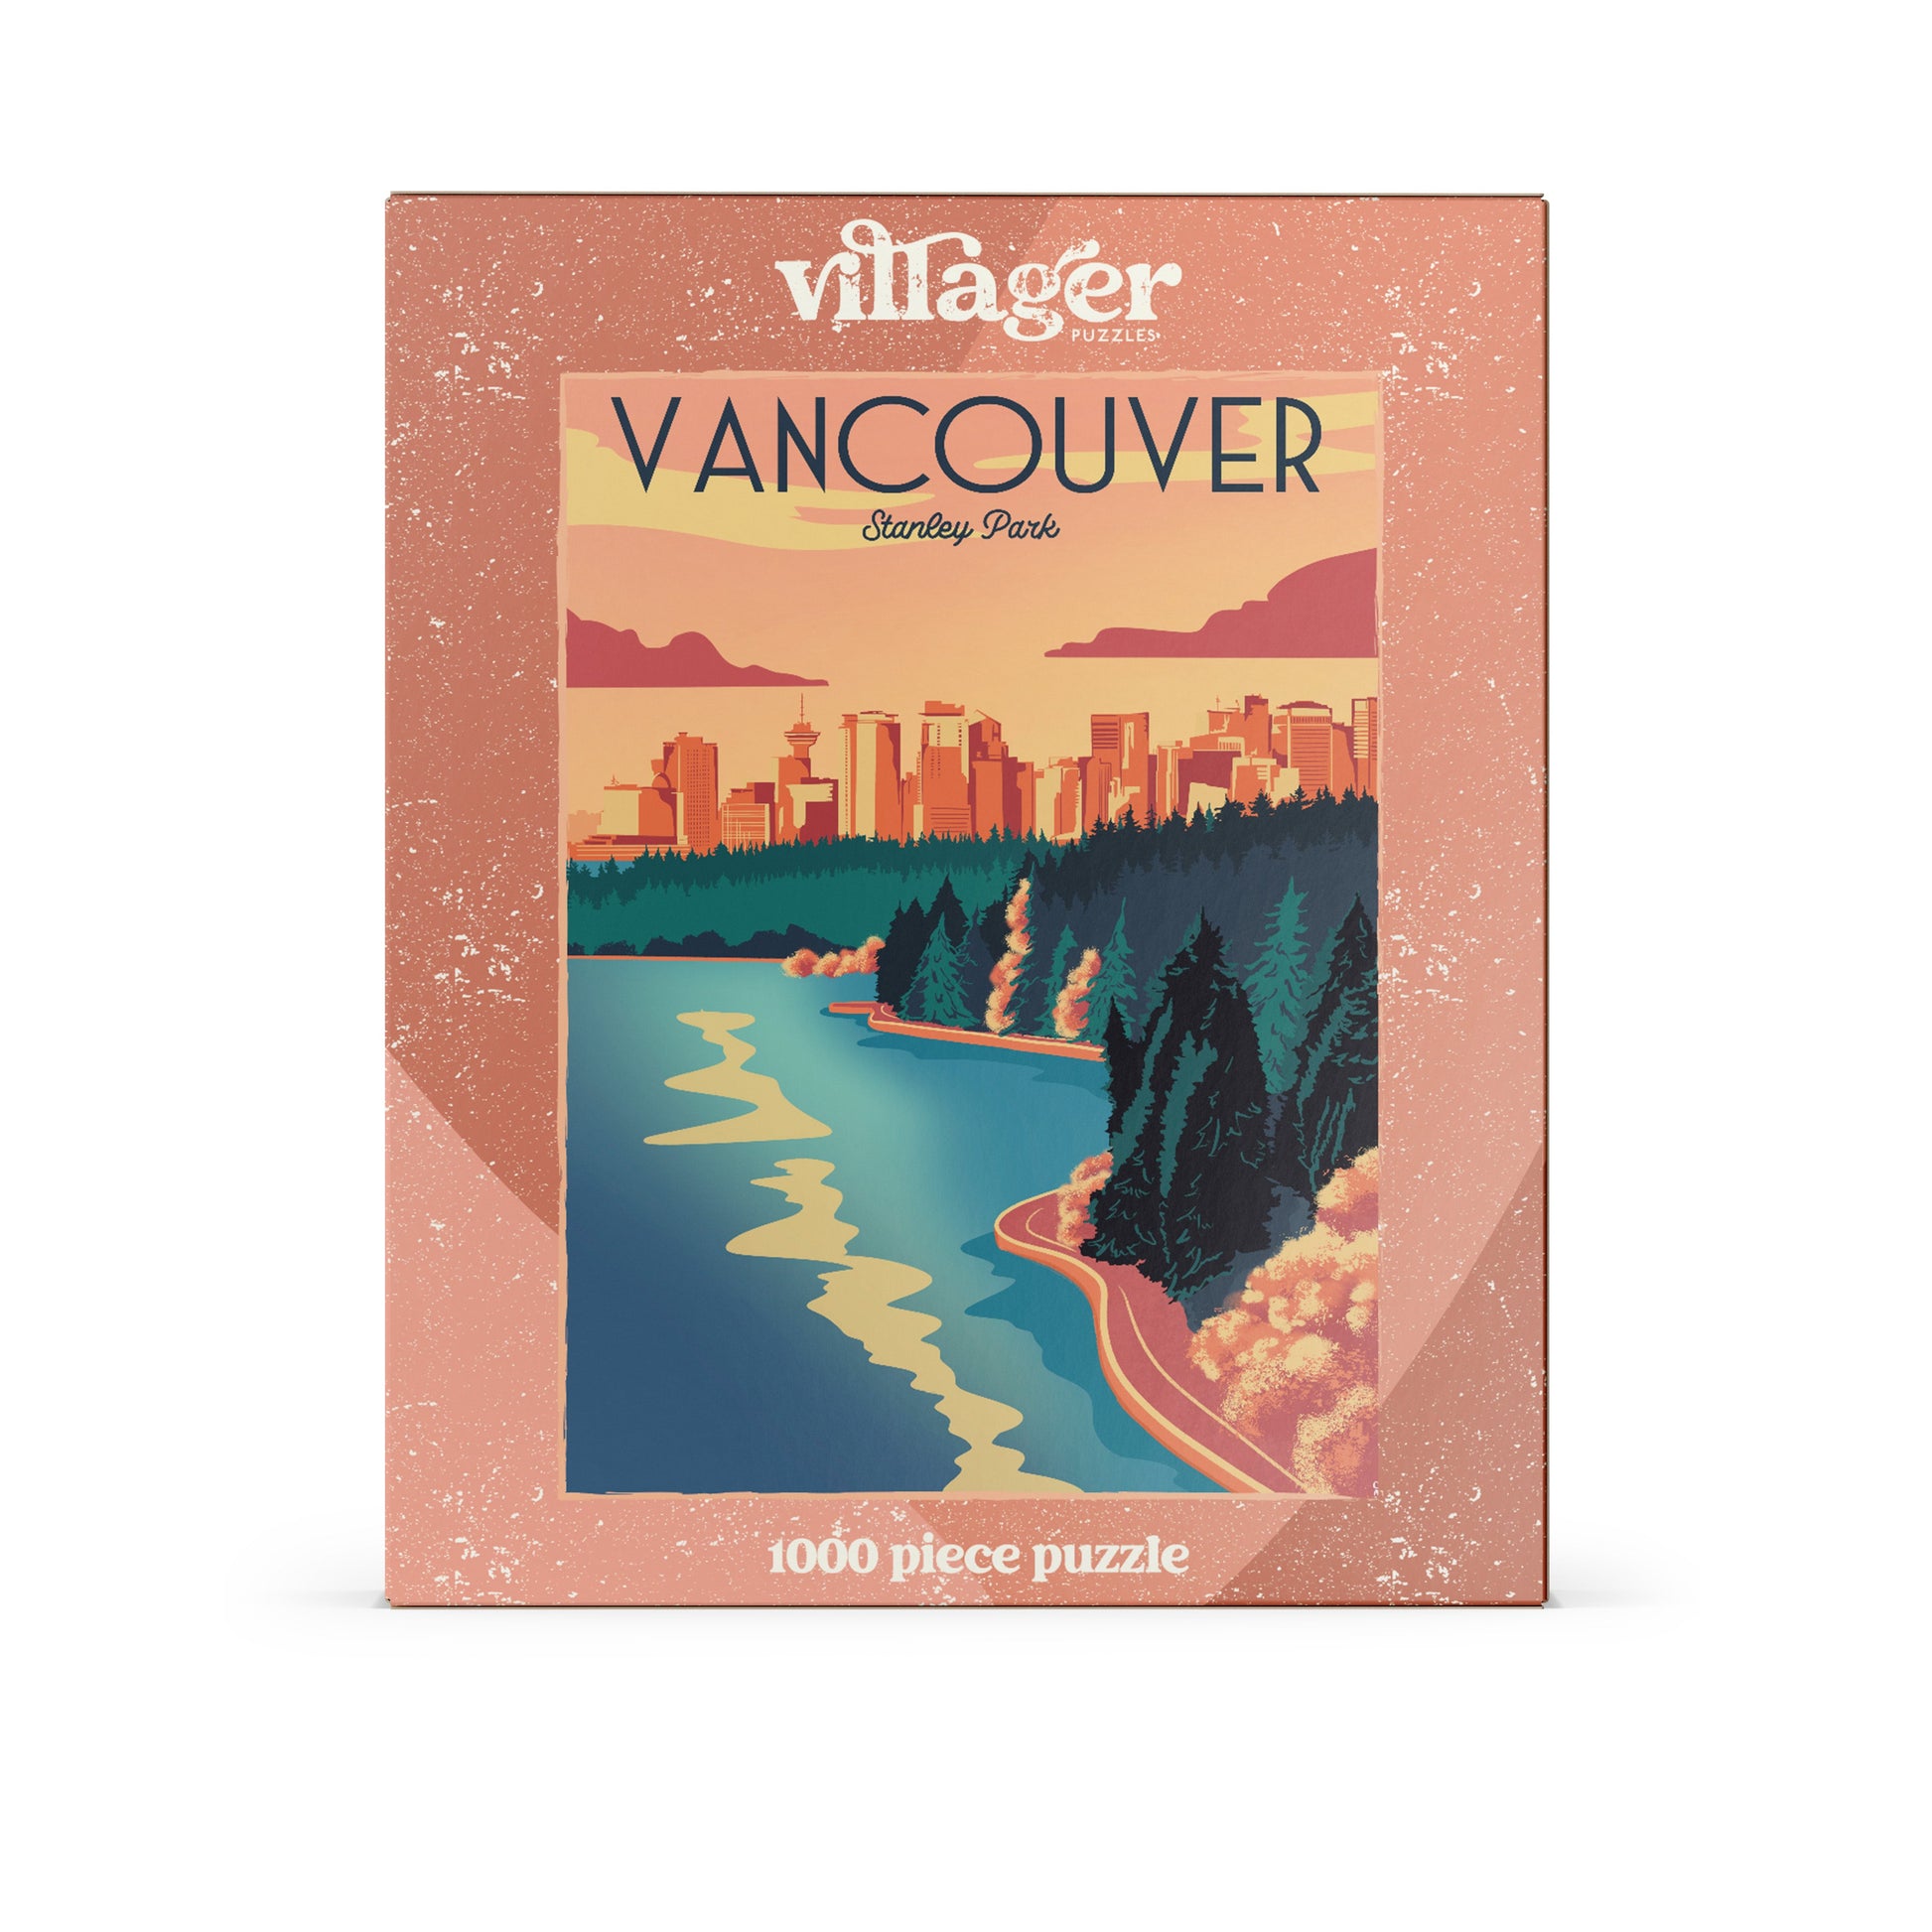 Front image of Villager Puzzle | Vancouver Sunset designed by Capri Sadler of Victoria BC Canada